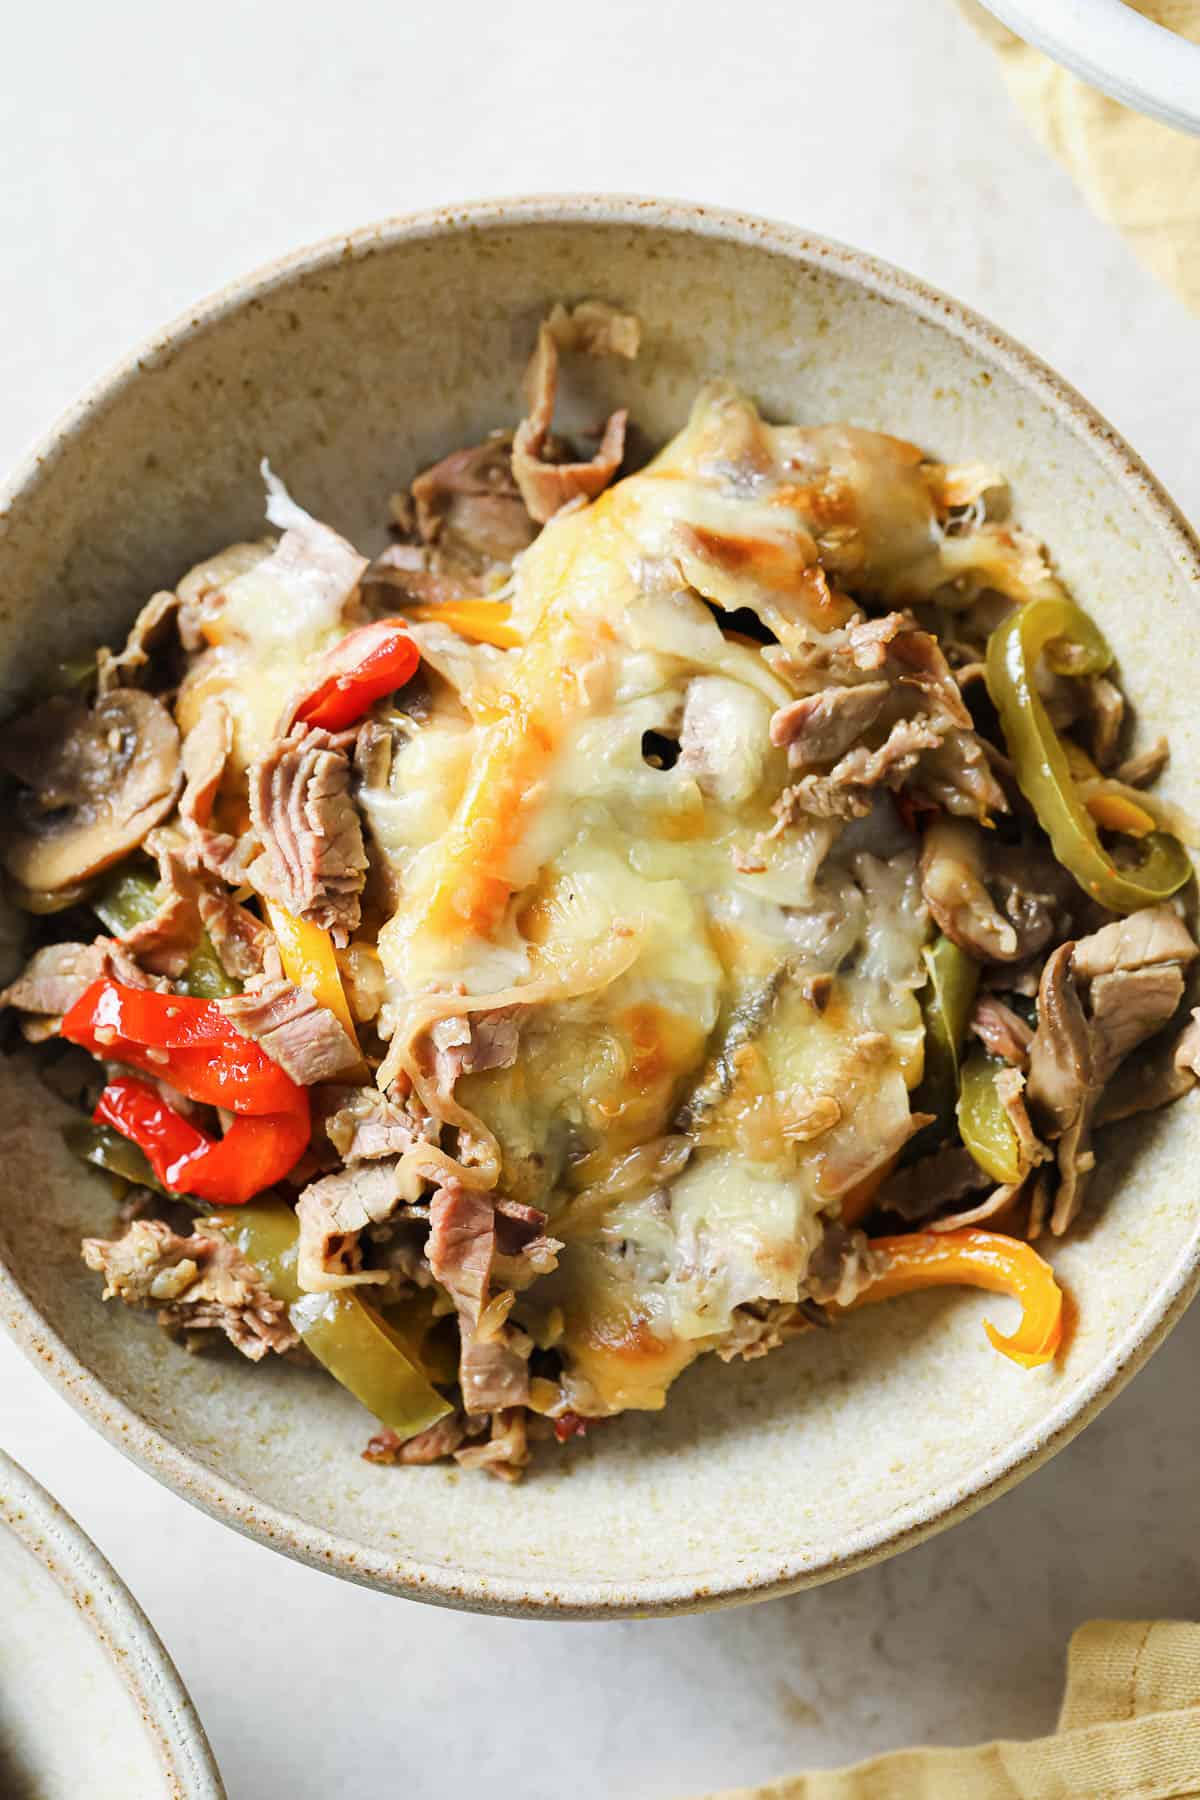 a bowl of Philly cheesesteak - peppers, onions, mushrooms, garlic, cheese